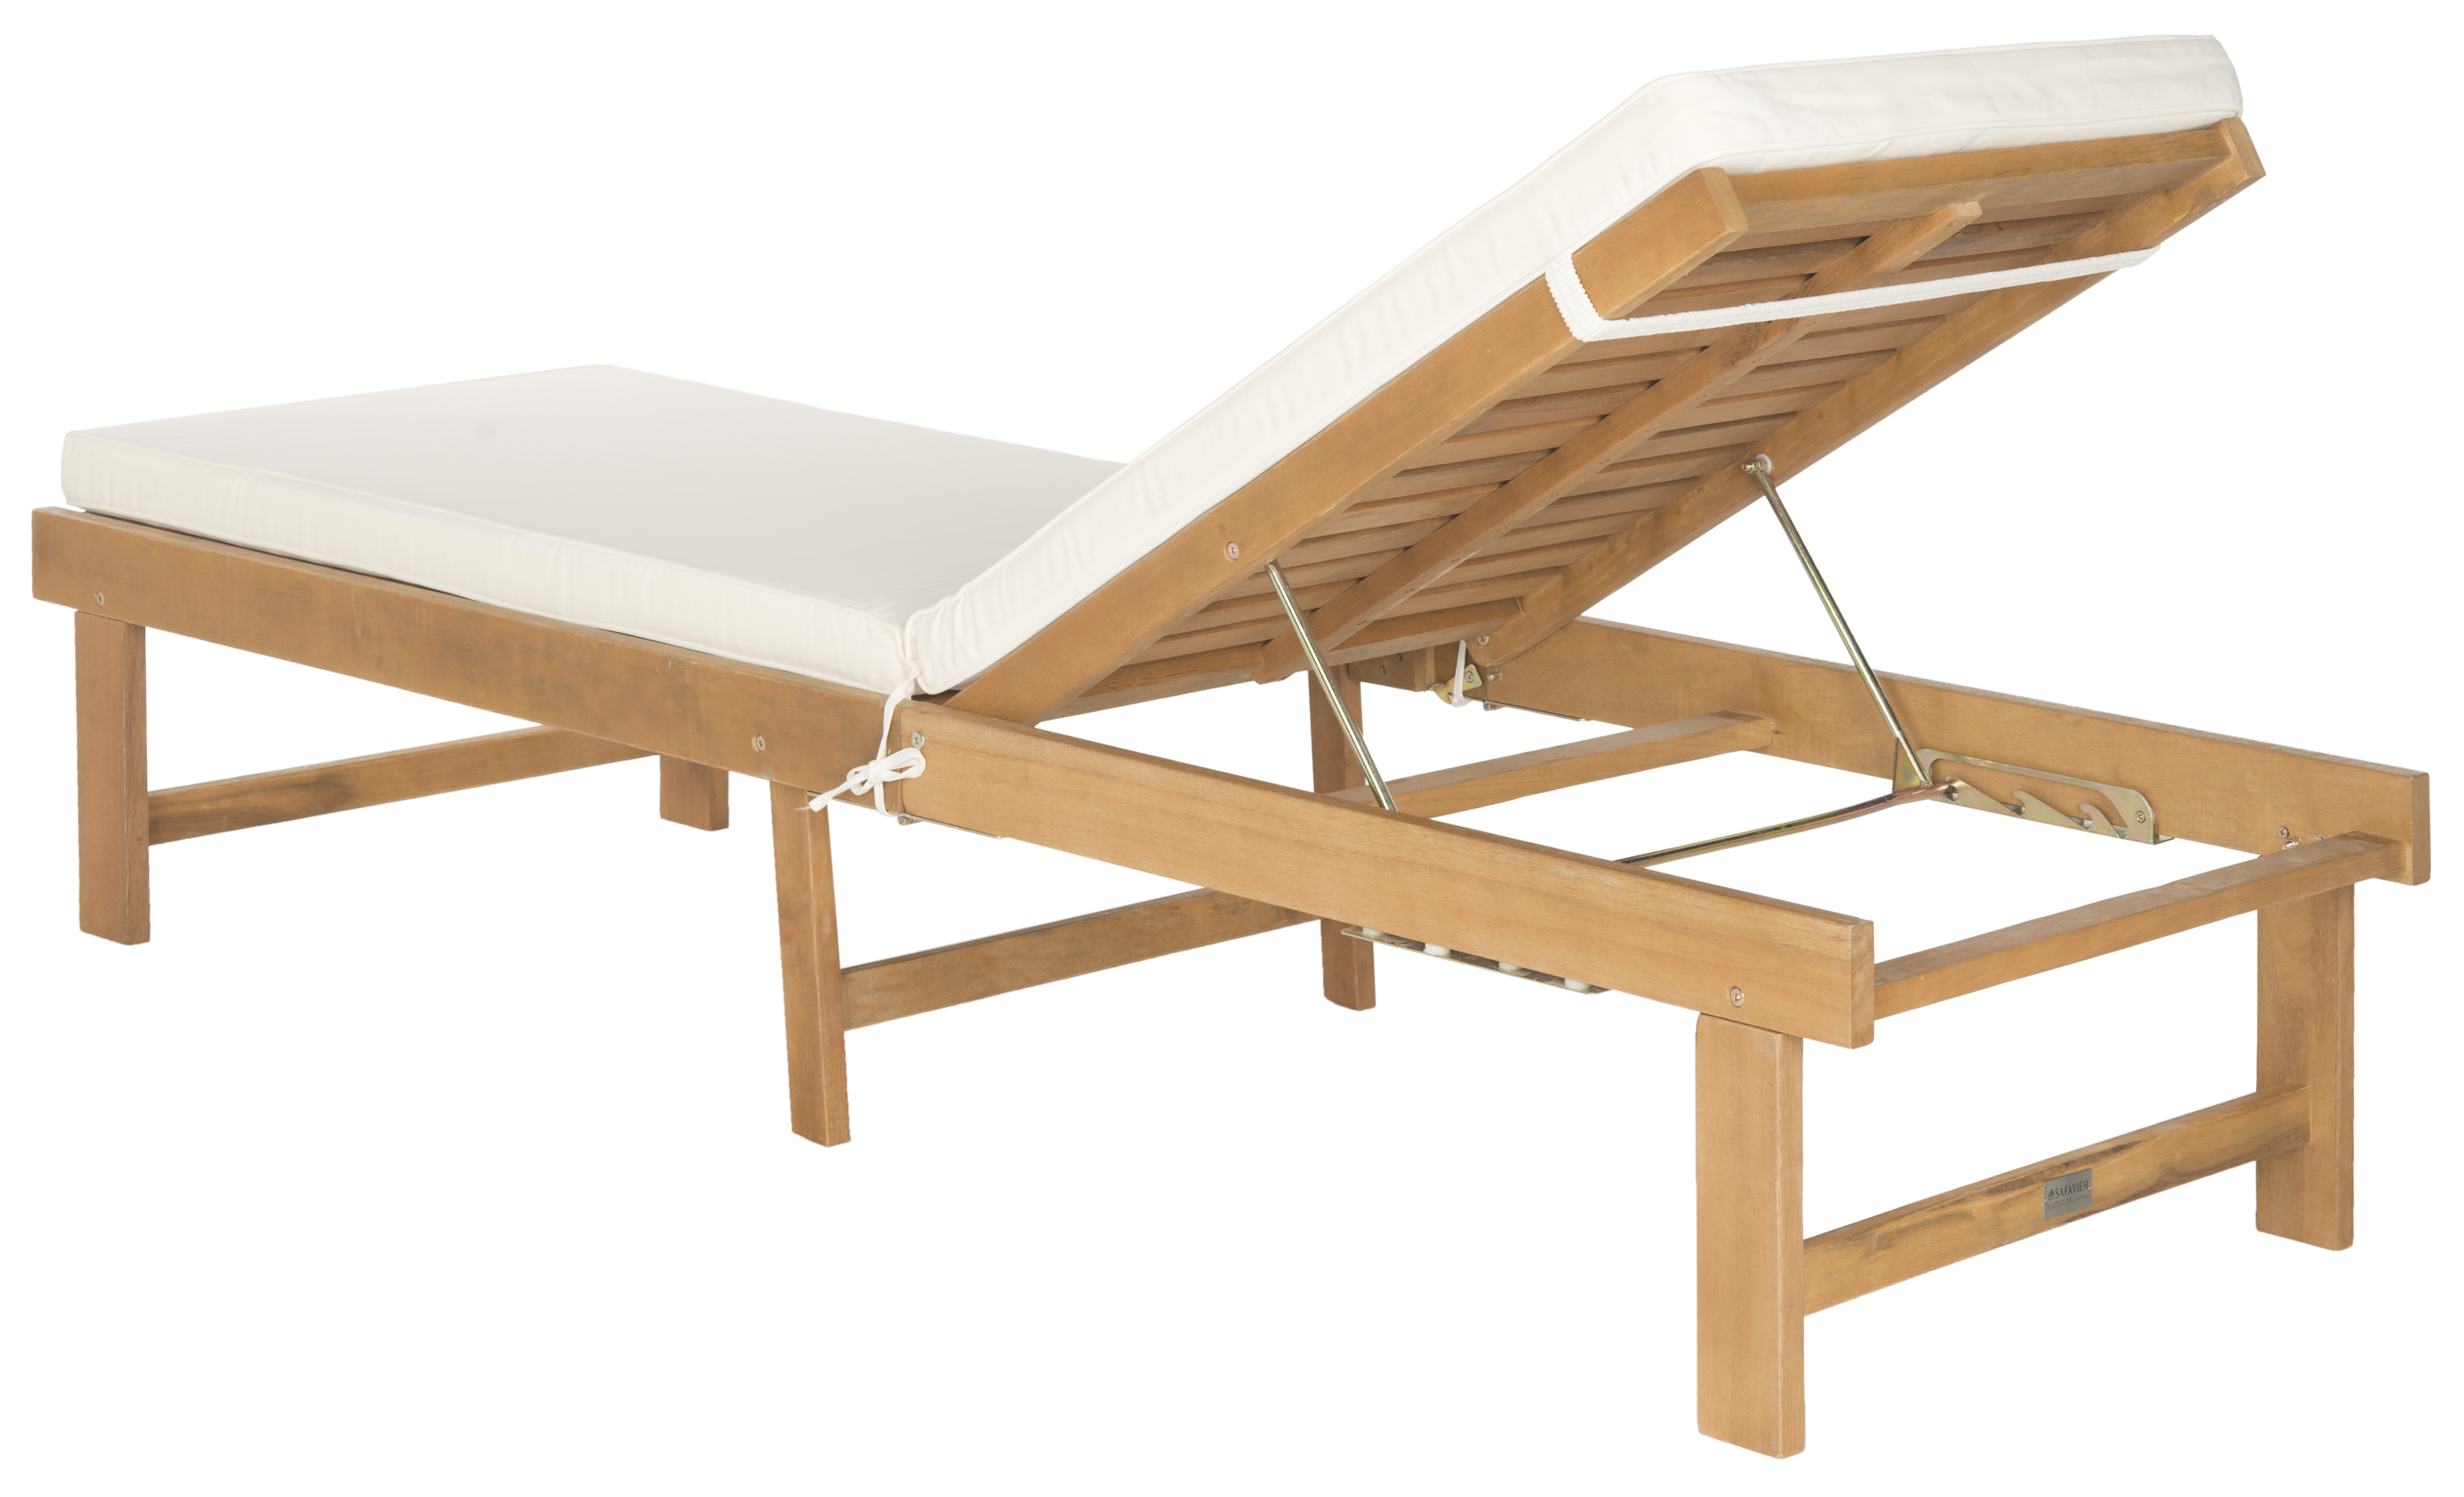 Inglewood Chaise Lounge Chair - Natural/Beige - Safavieh - Image 2